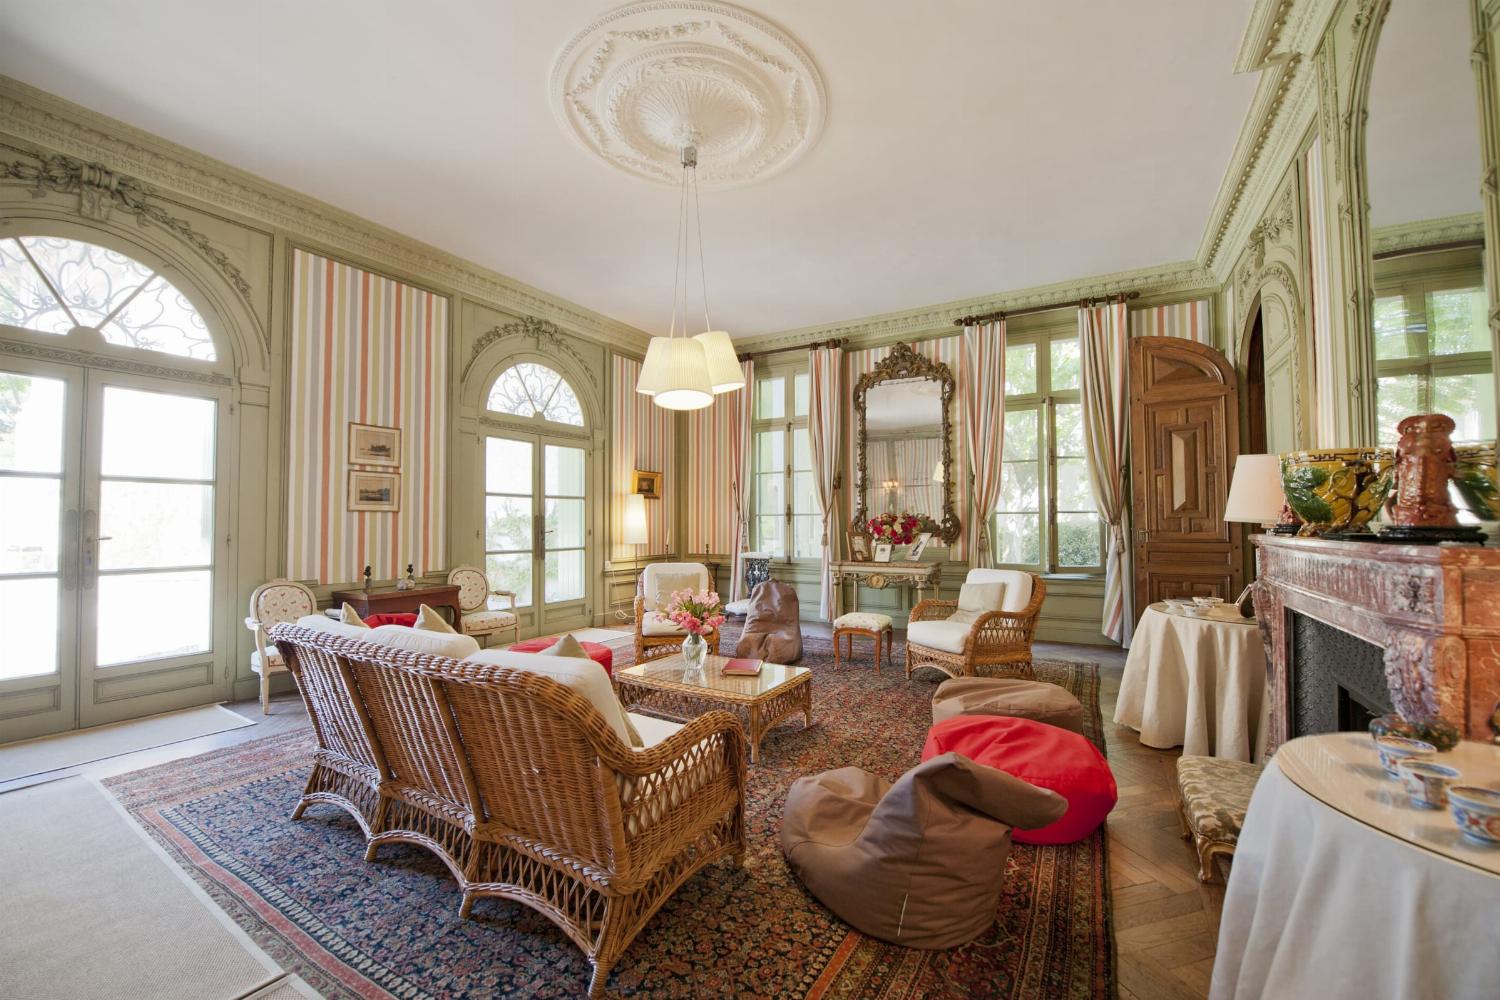 Living room | Holiday château in the South of France